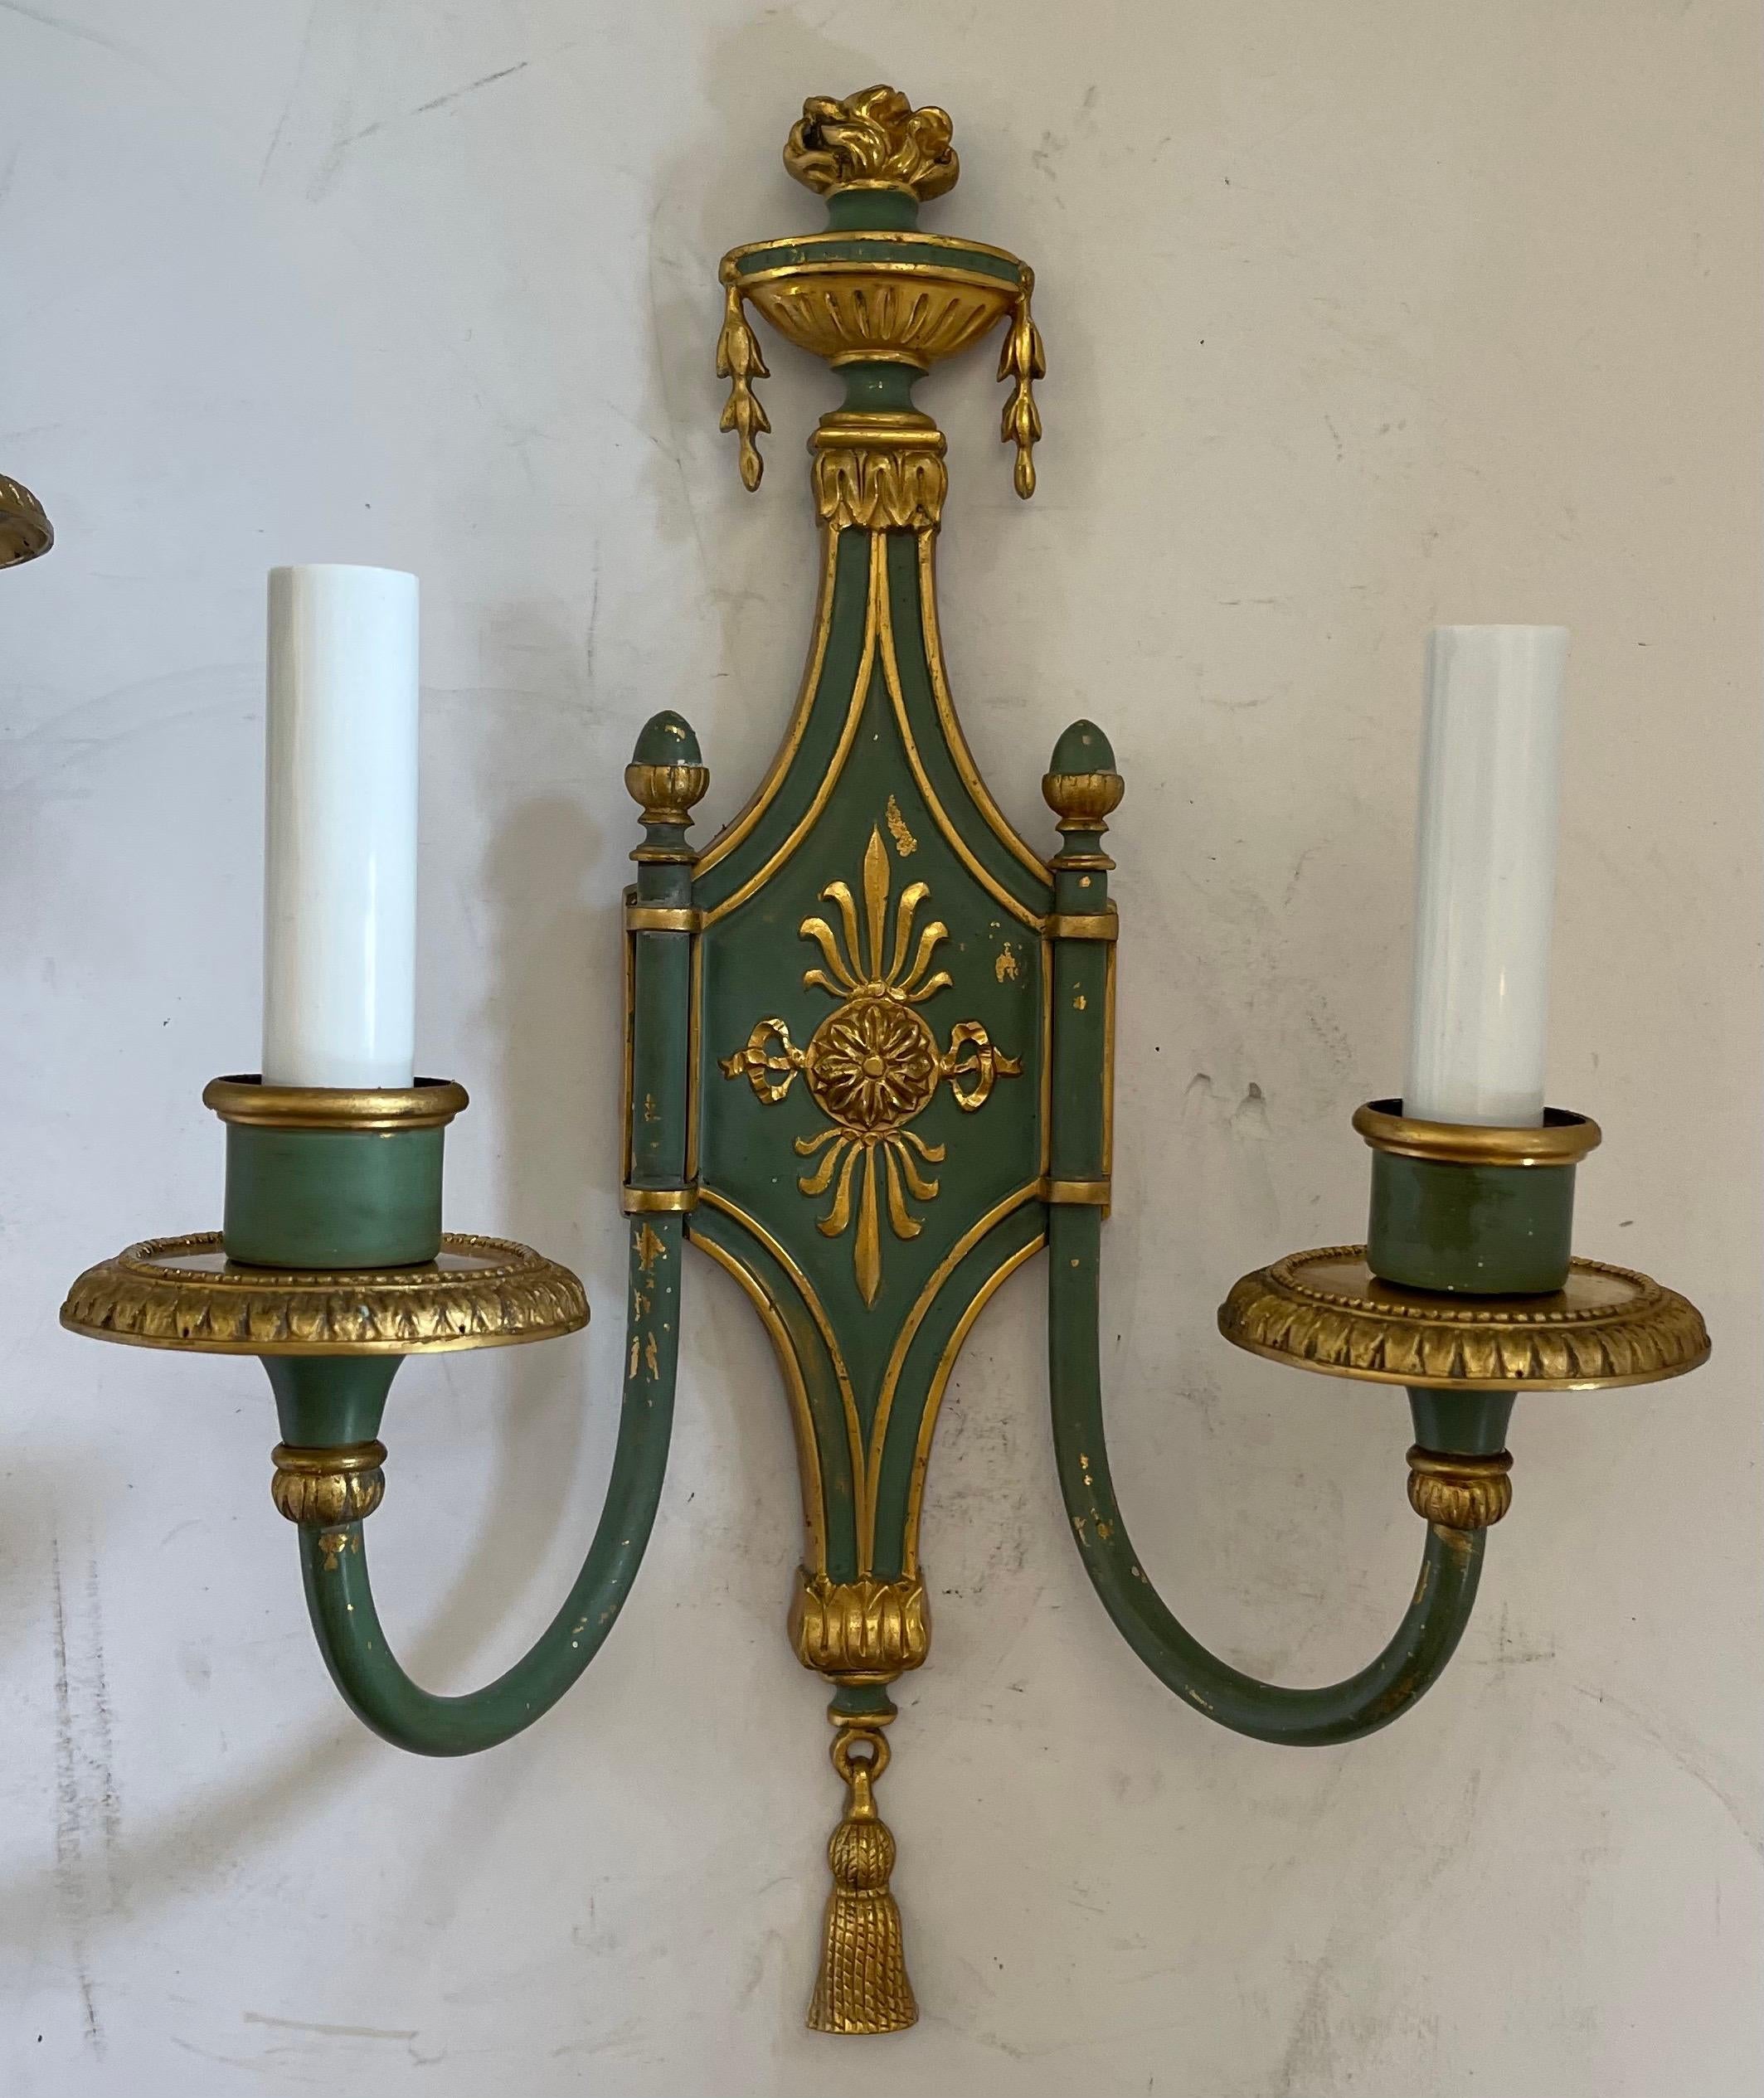 A handsome pair of E.F. Caldwell Adams Regency style urn top green & gold gilt two-light sconces
Rewired and ready to install with mounting hardware.